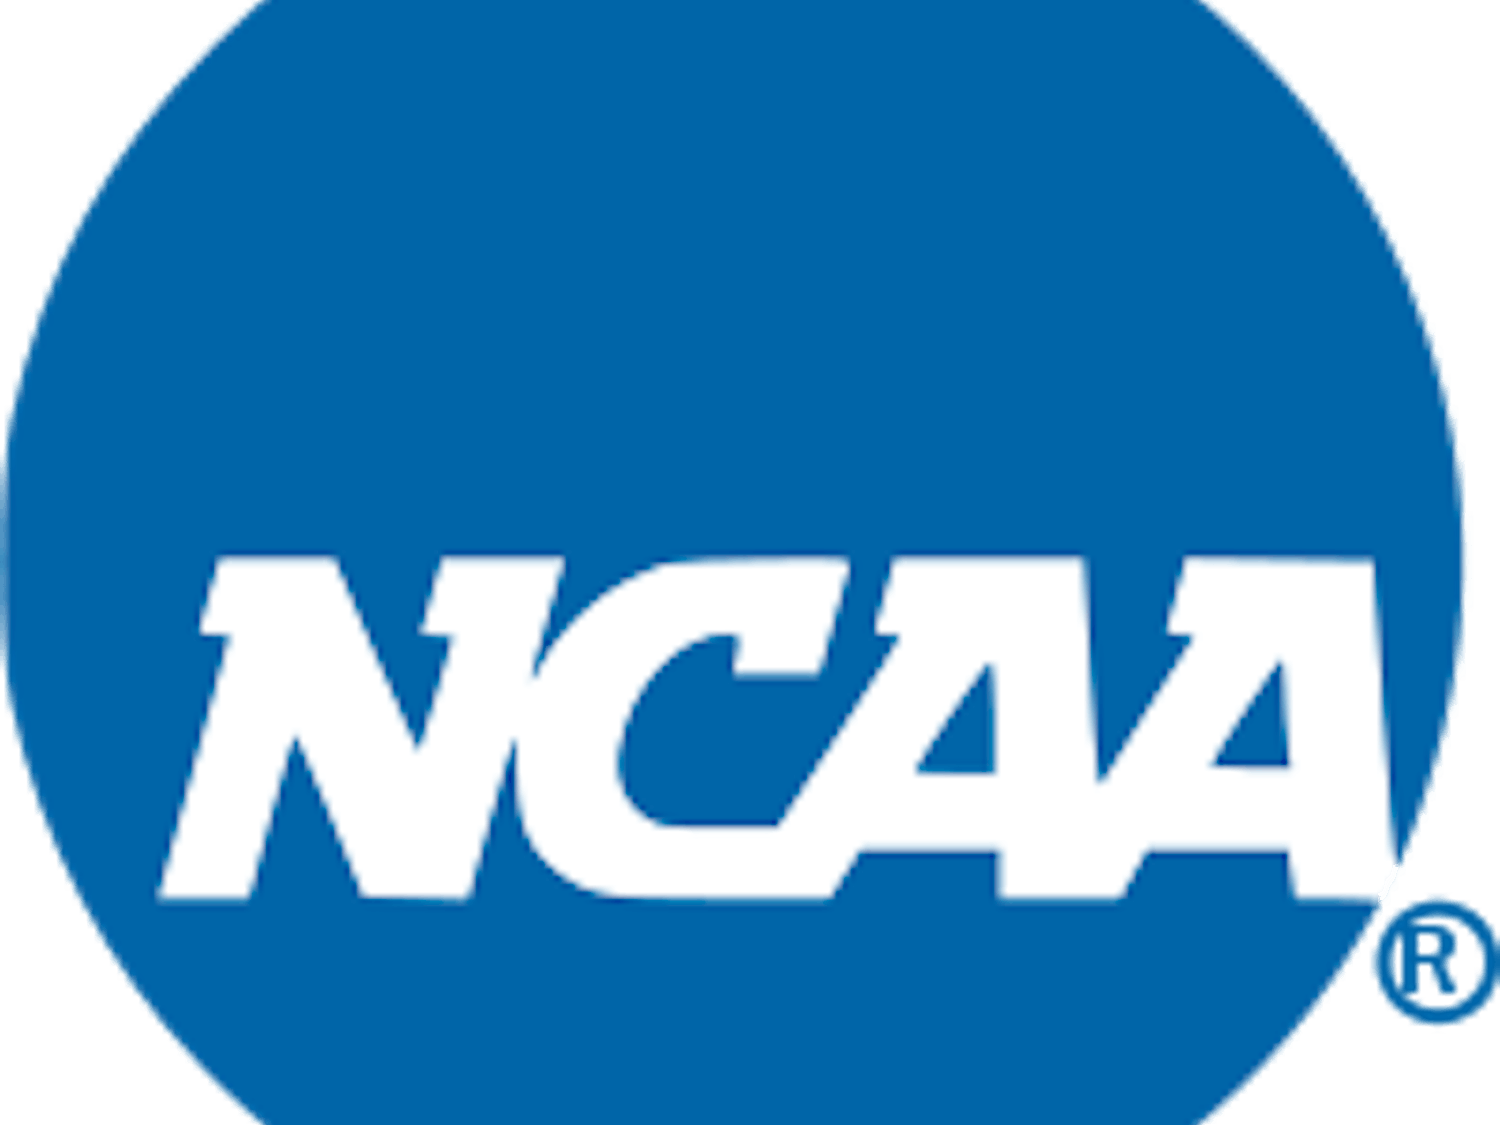 The NCAA punishments for Penn State have been criticized as too severe by some outlets. (Courtesy of ncaa.org)